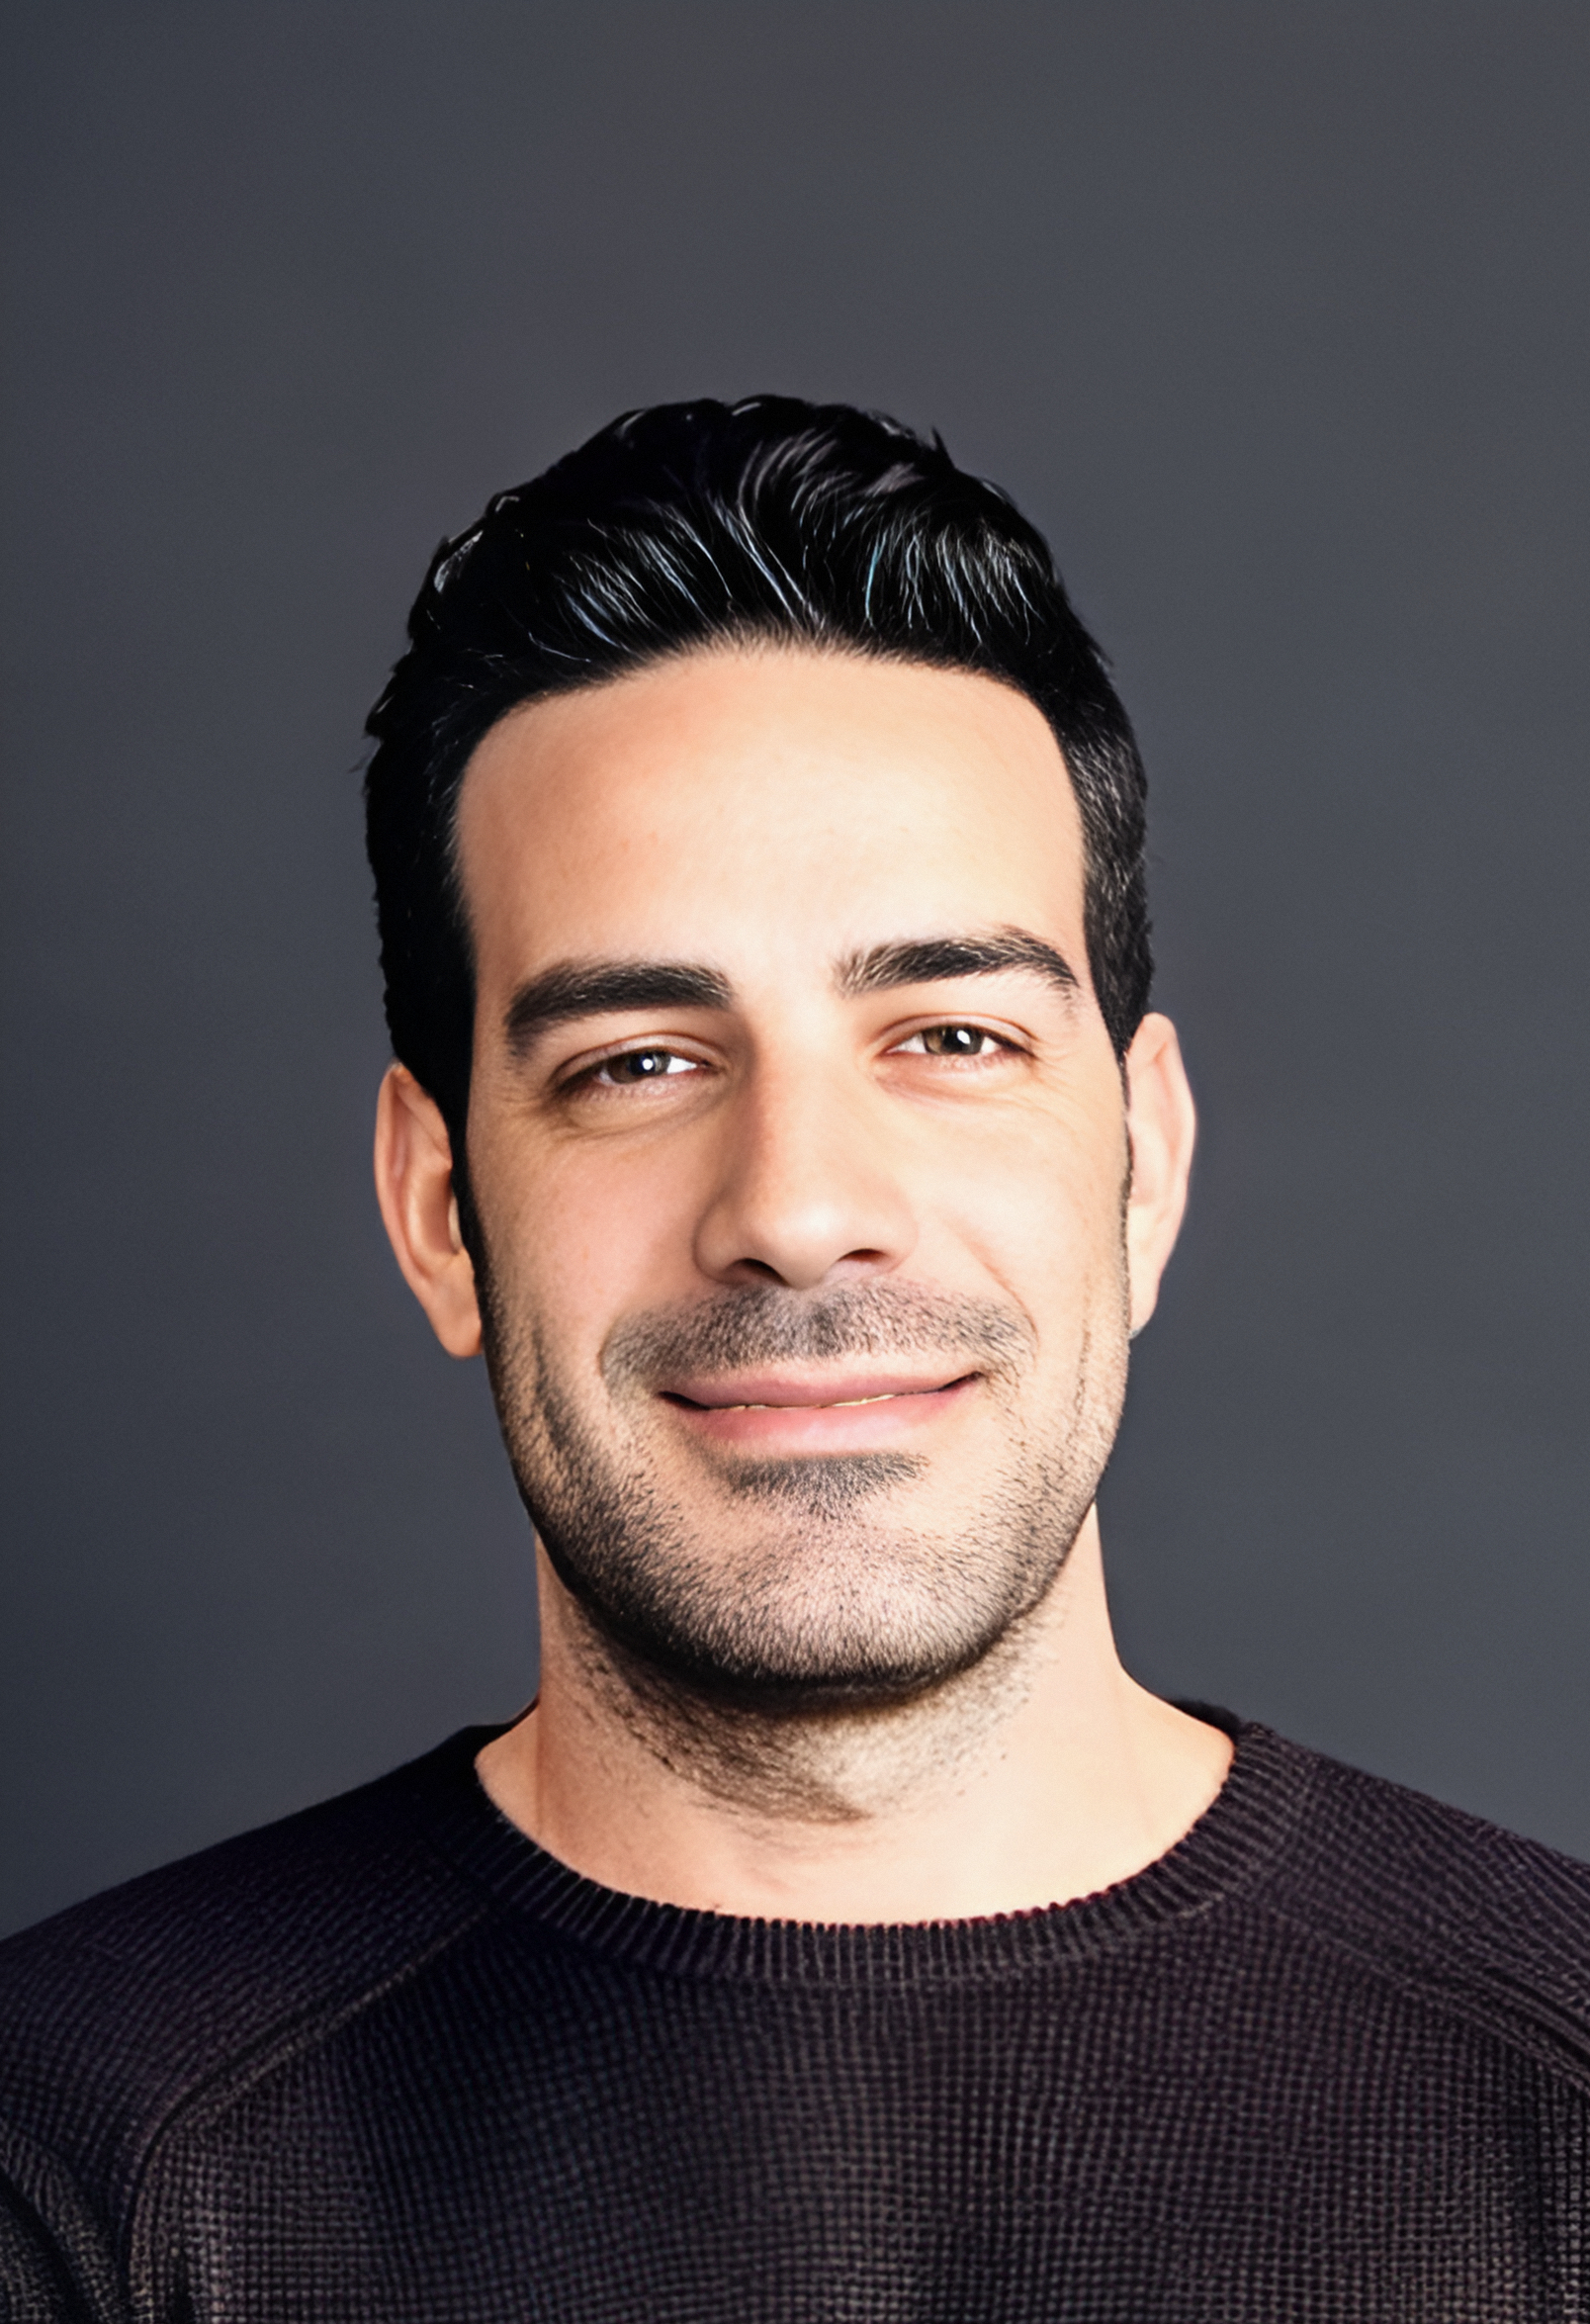 Giannis Stratakis - Founder at Data Bloo